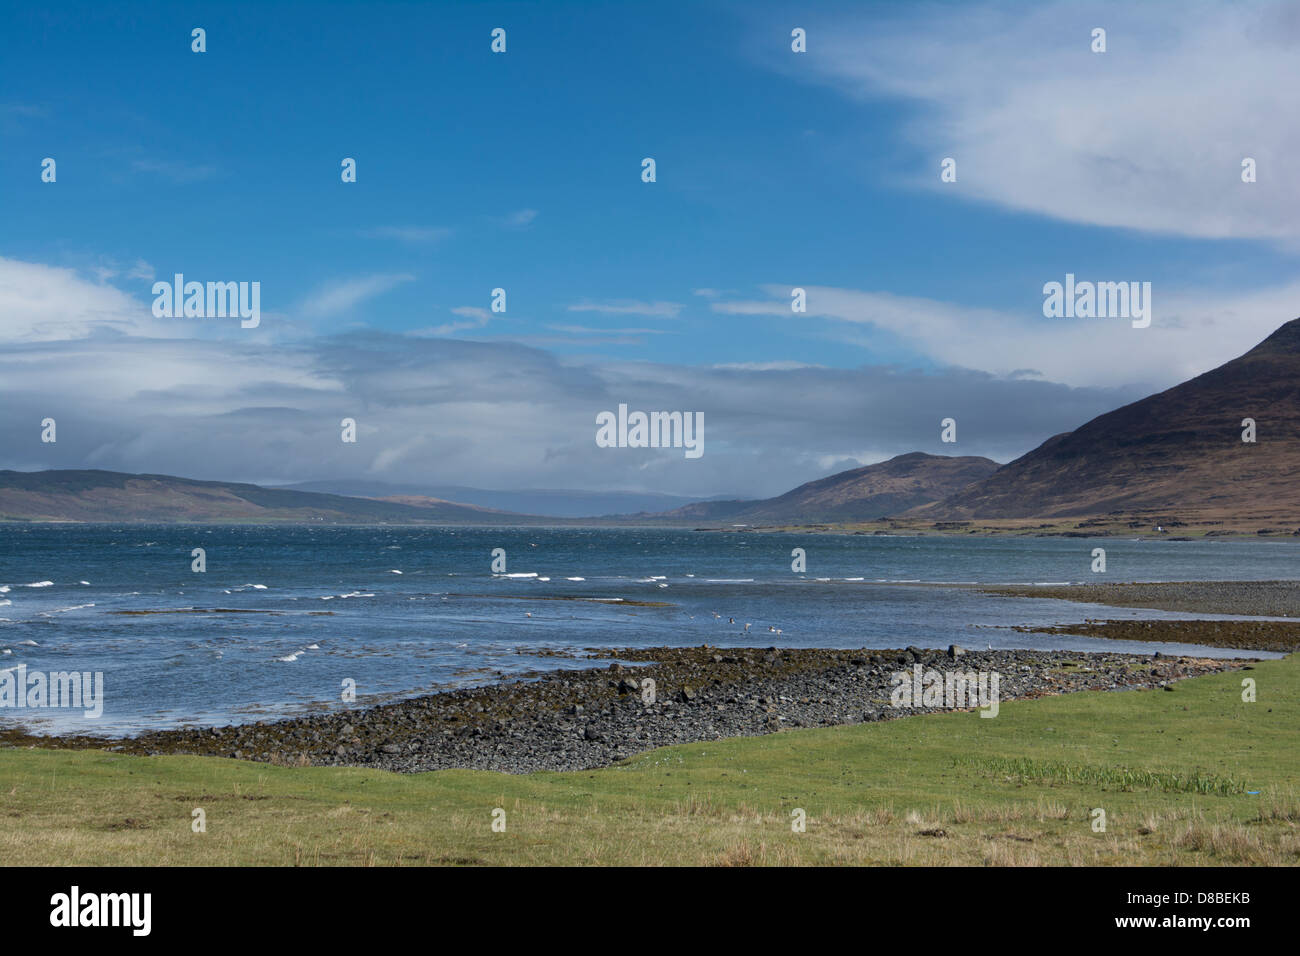 View of Loch Na Keal, looking North east towards the Mull mainland, Stock Photo